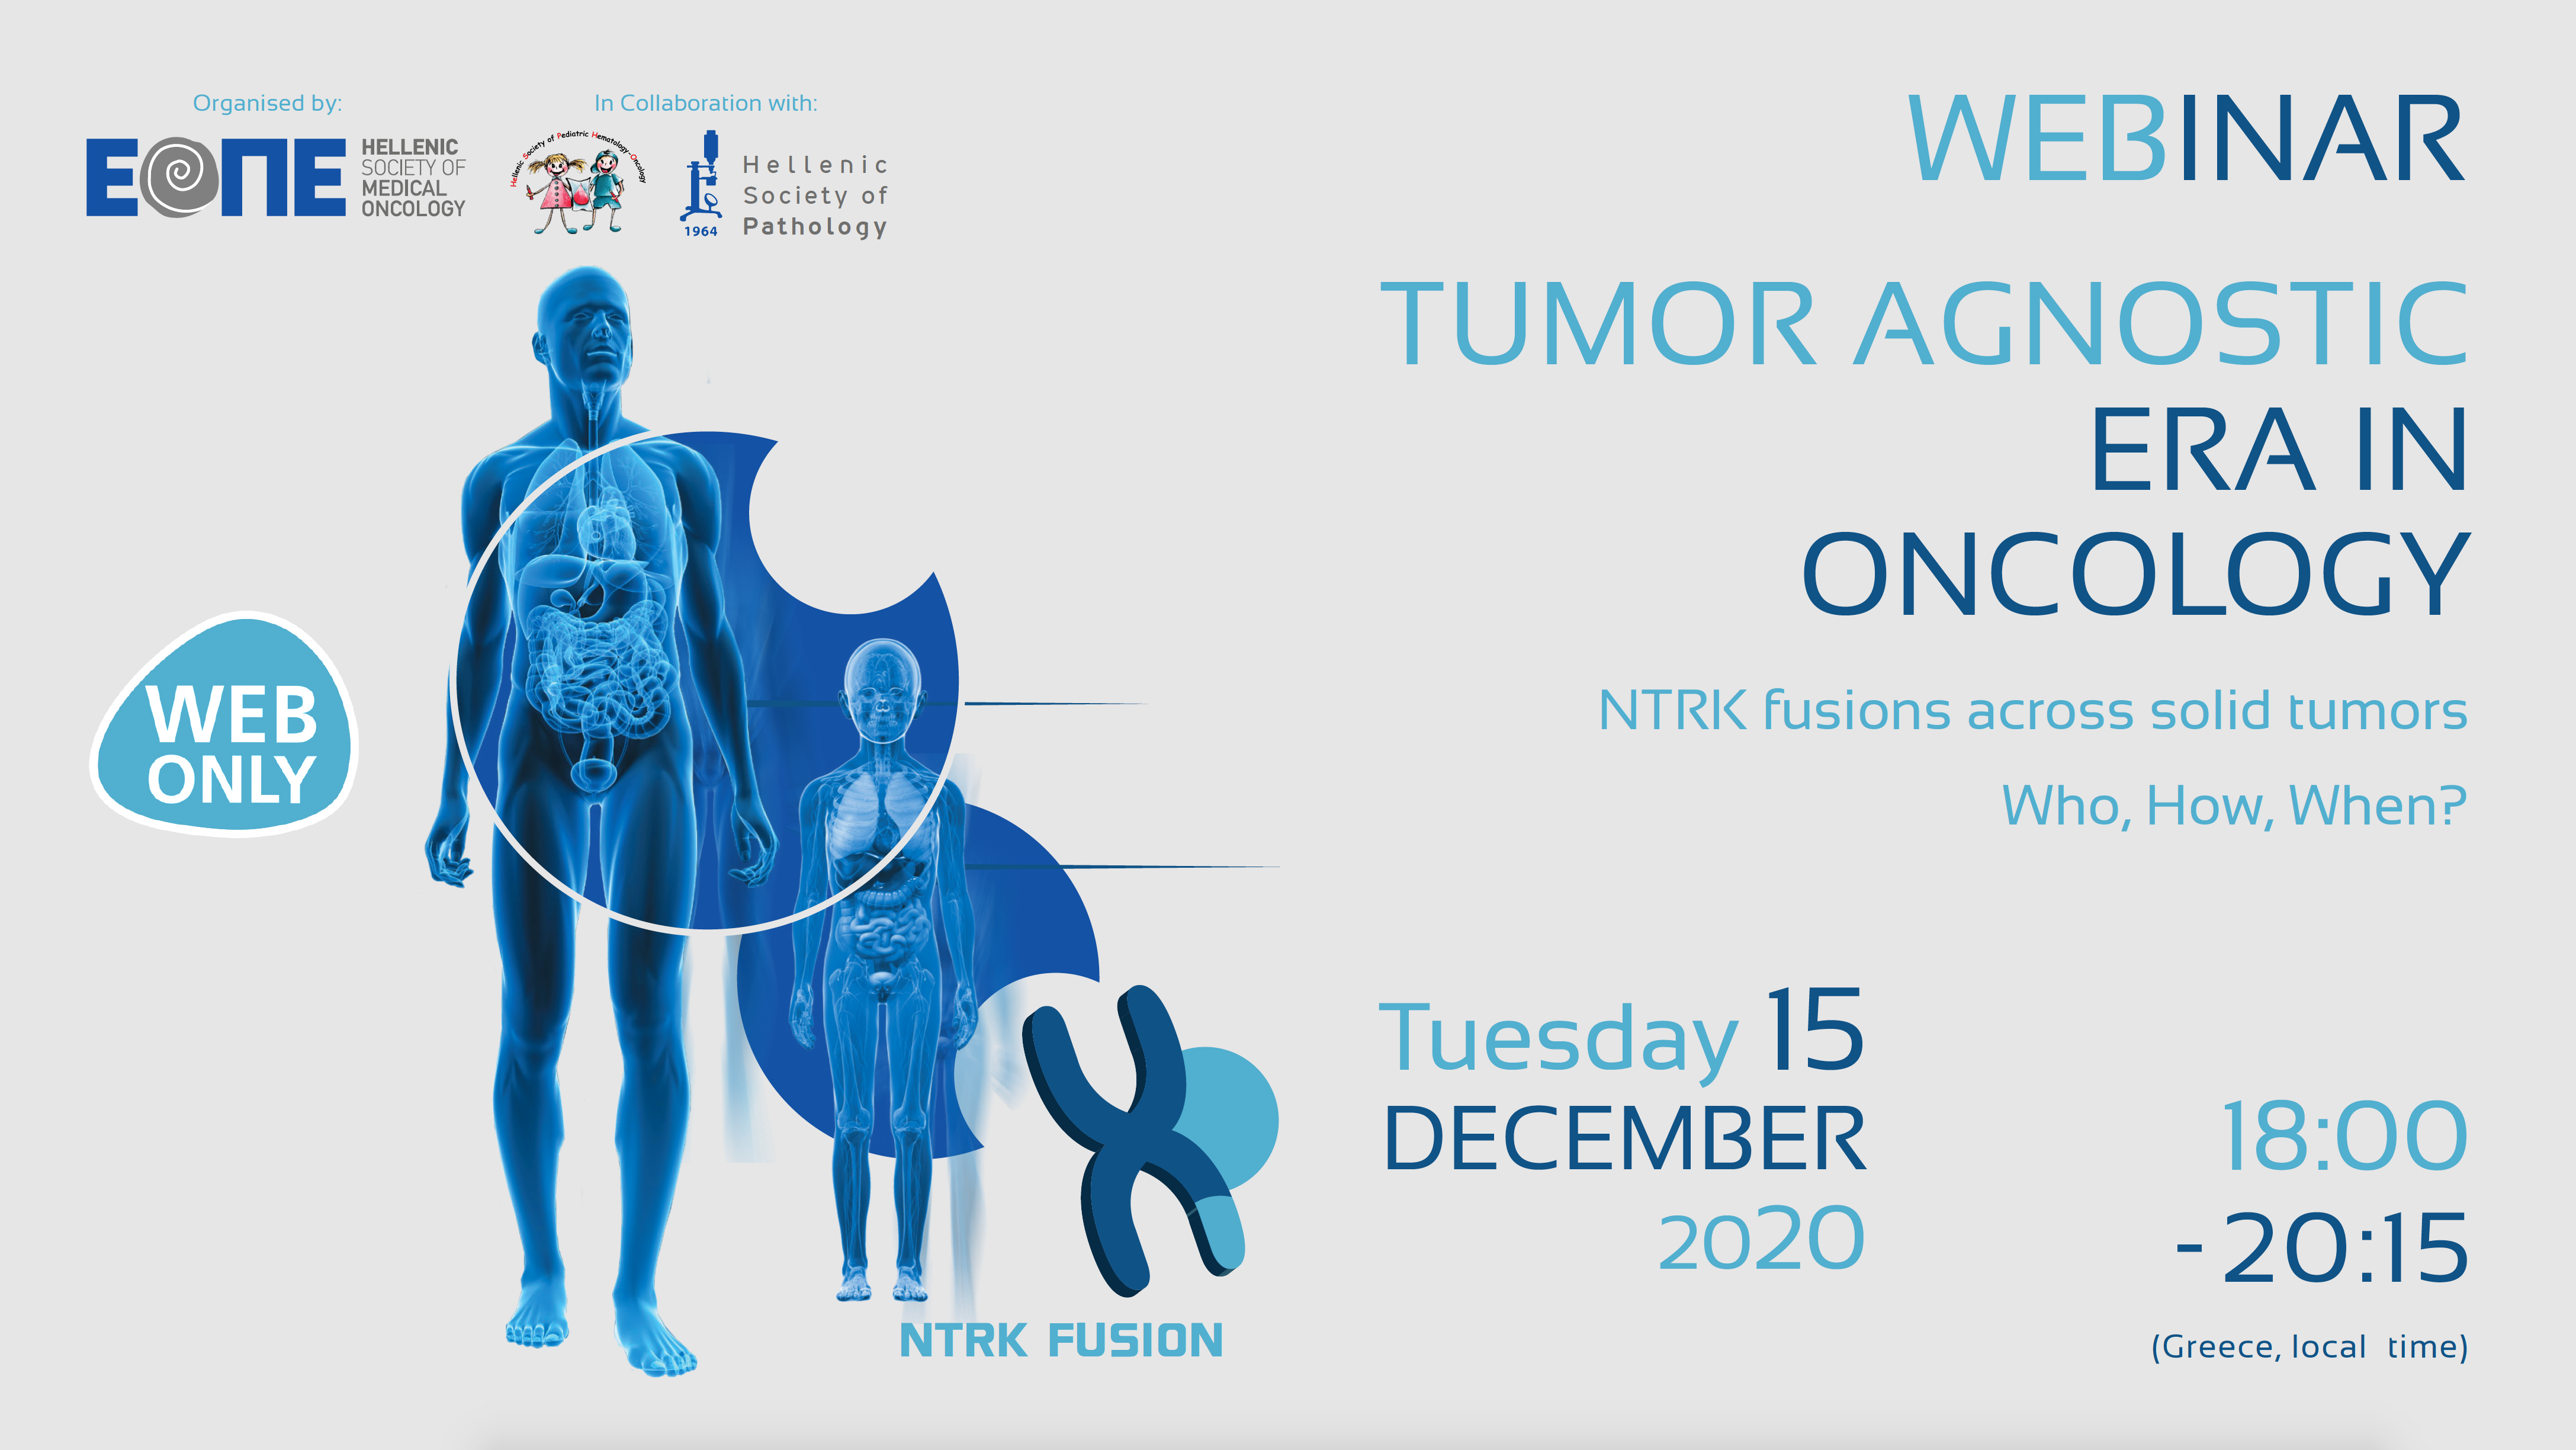 Webinar  “Tumor agnostic era in oncology: NTRK fusions across solid tumors – Who, How, When?”